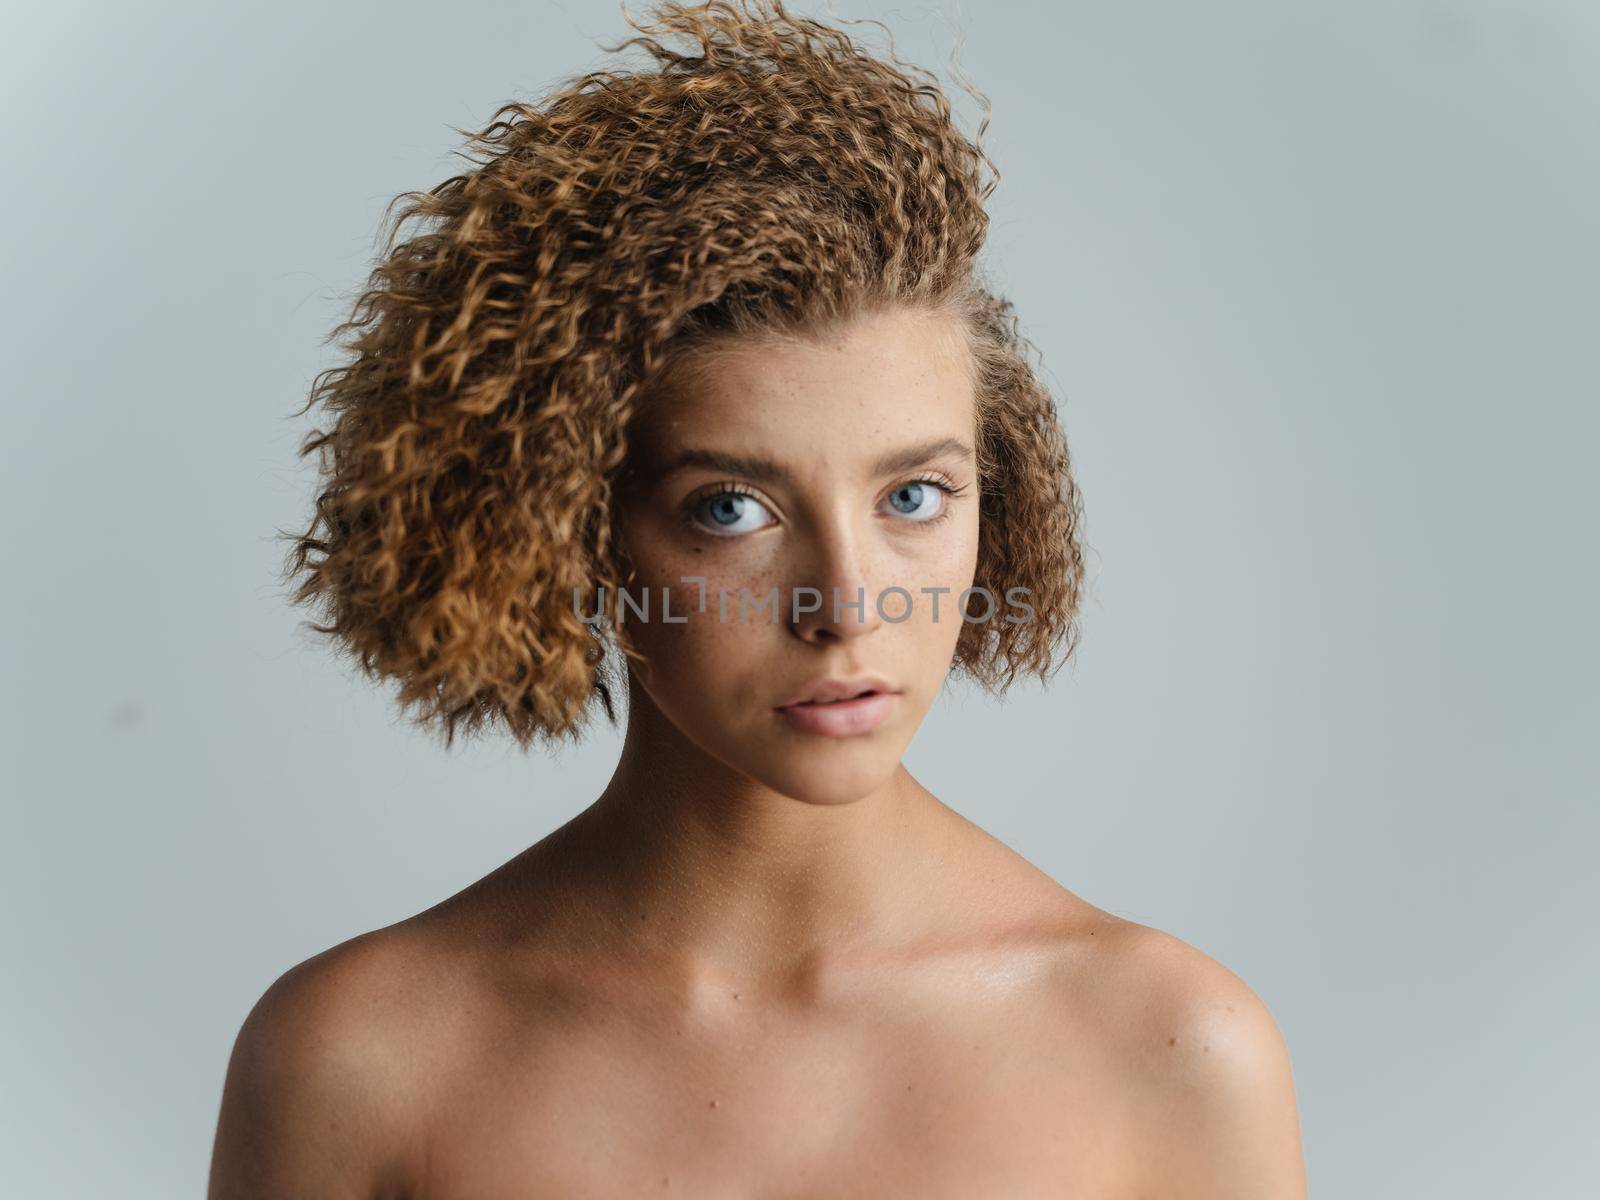 Woman with hair naked shoulders clean skin cosmetics model by SHOTPRIME